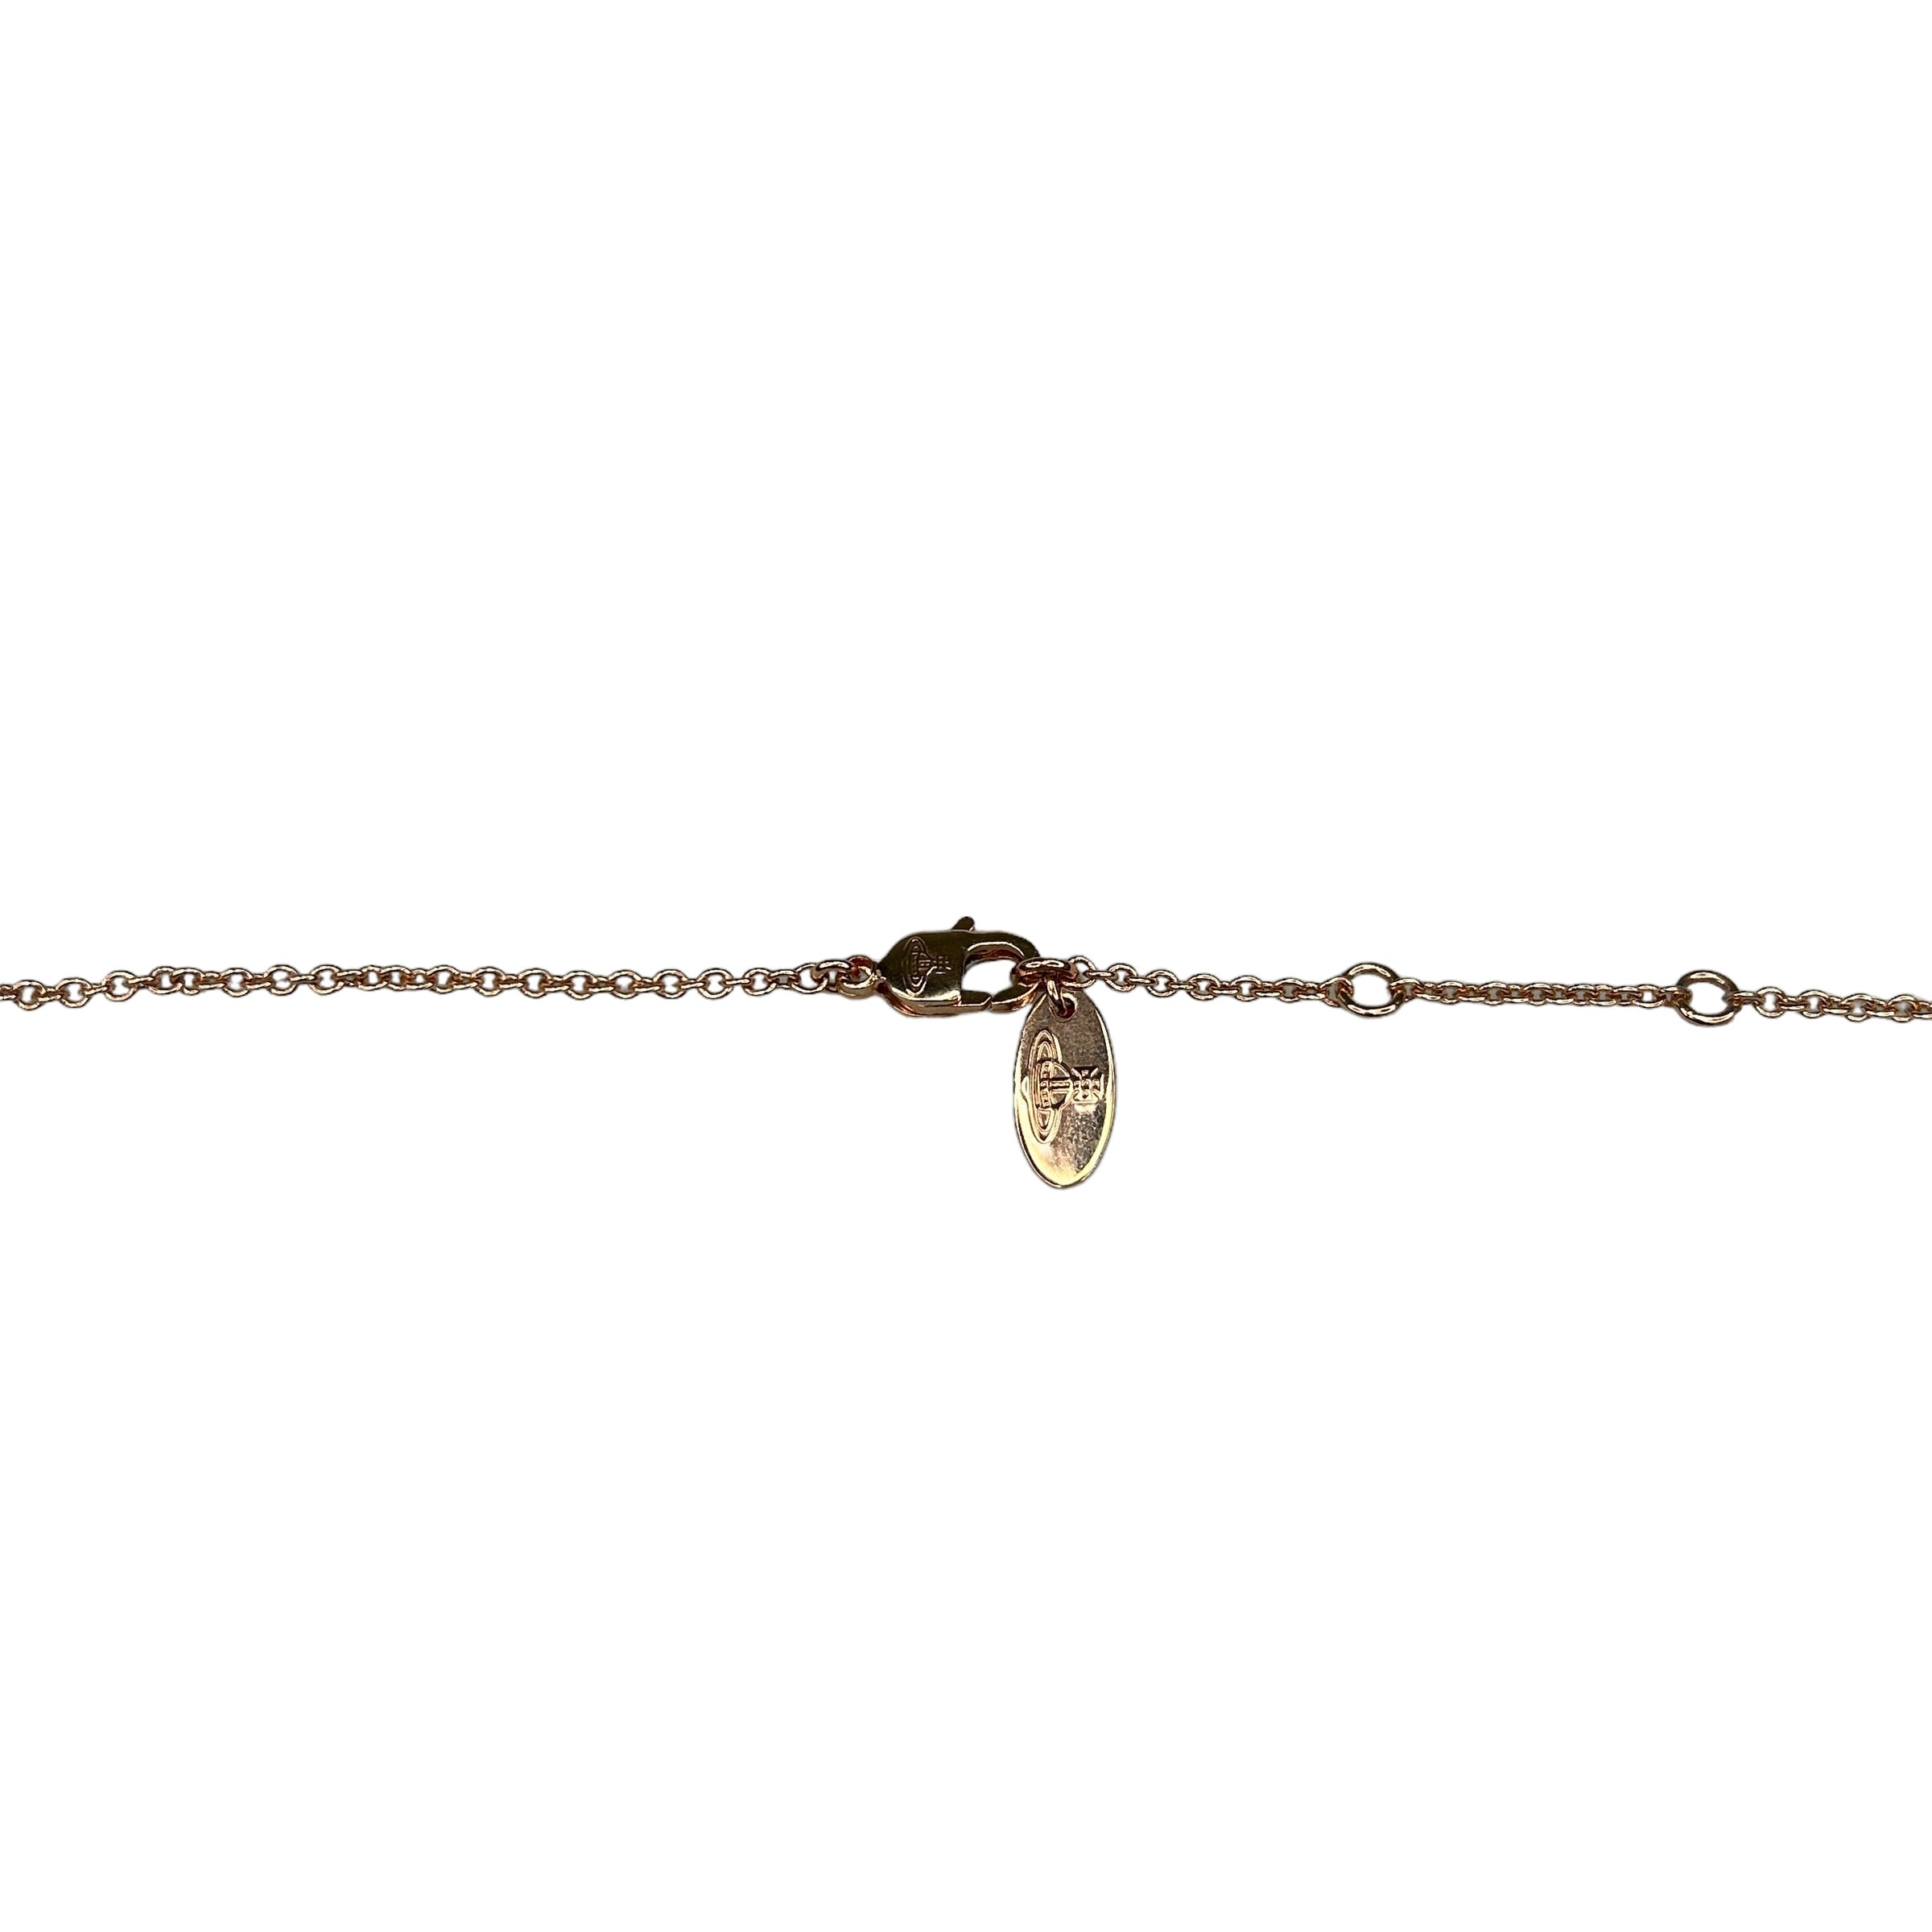 VIVIENNE WESTWOOD ROSE-GOLD PINK SPELLOUT ORB NECKLACE